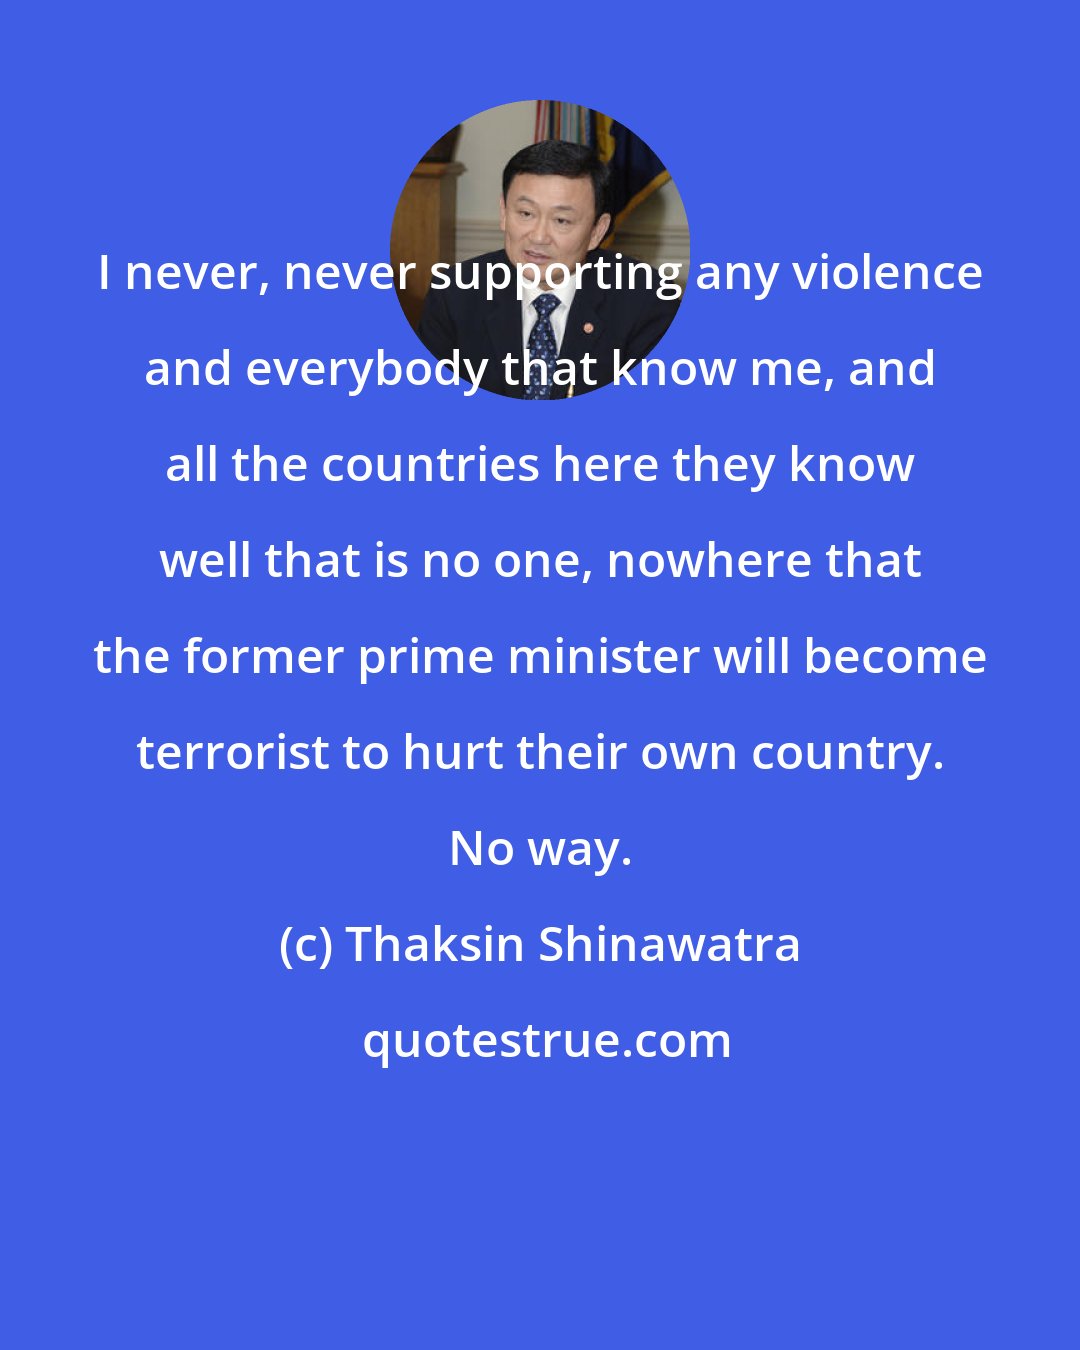 Thaksin Shinawatra: I never, never supporting any violence and everybody that know me, and all the countries here they know well that is no one, nowhere that the former prime minister will become terrorist to hurt their own country. No way.